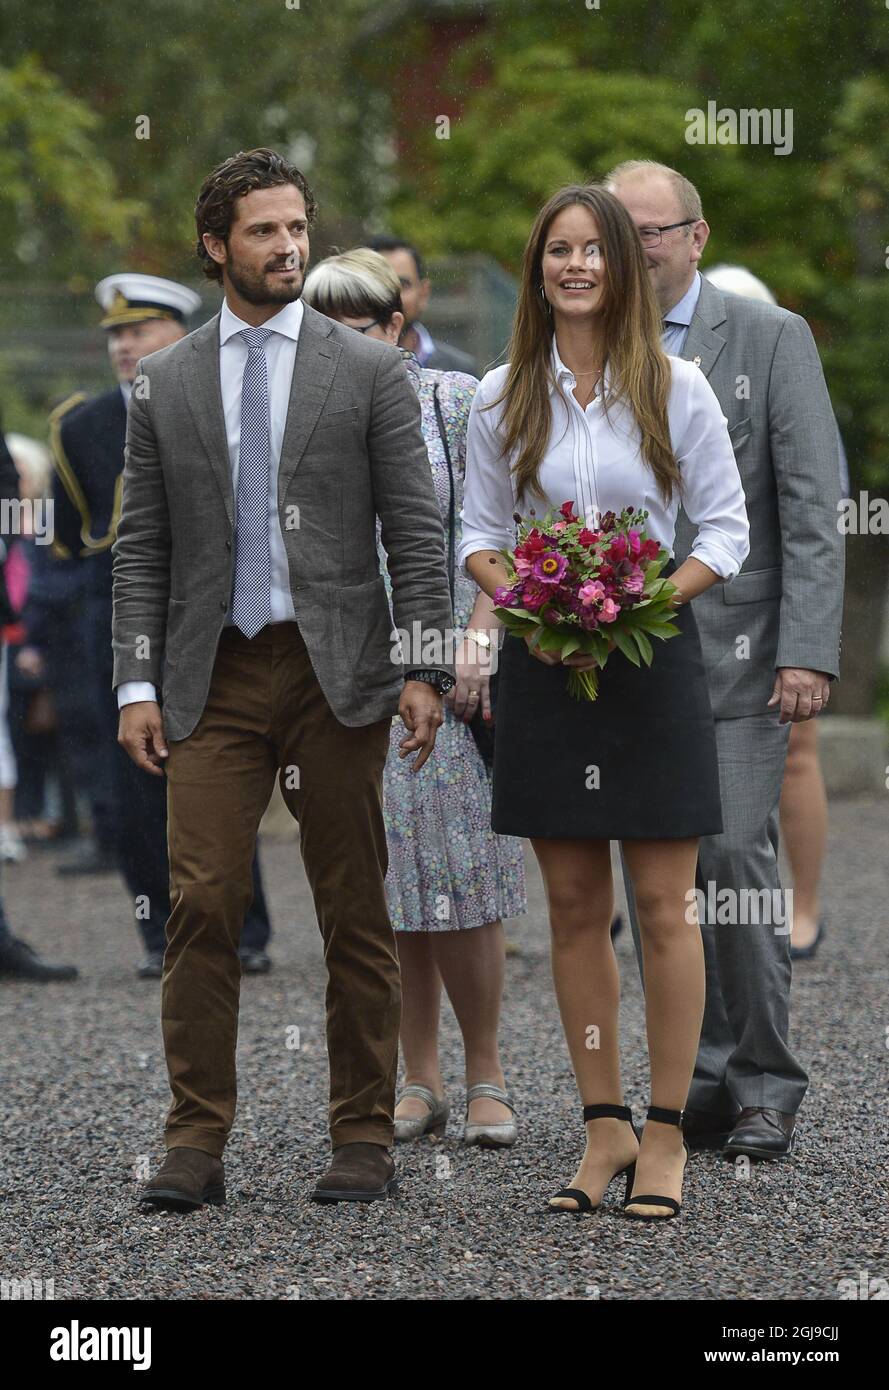 KARLSTAD 2015-08-26 Prince Carl Philip and Princess Sofia visit the home of Swedish author Selma Lagerlof in Marbacka in Sunne at county of Varmland Sweden August 26, 2015. The Prince couple is on their first visit to their home county as Duke and Duchess of the Varmland . Foto Jonas Ekstromer / TT / kod 10030  Stock Photo